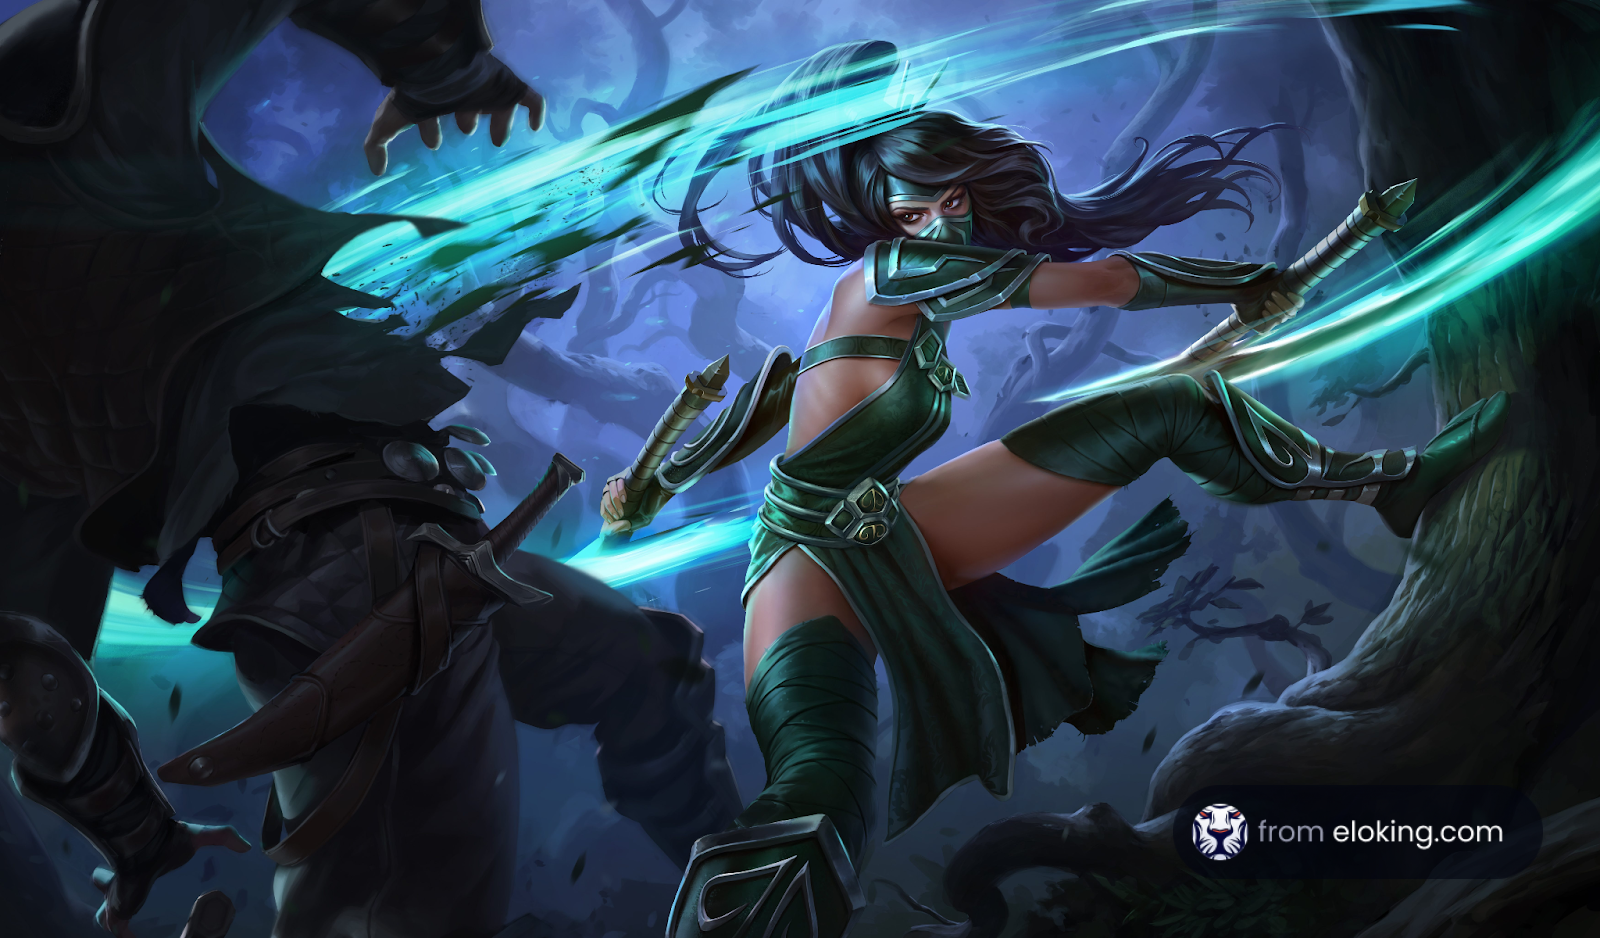 Female warrior in green battling a shadow monster in a mystical forest